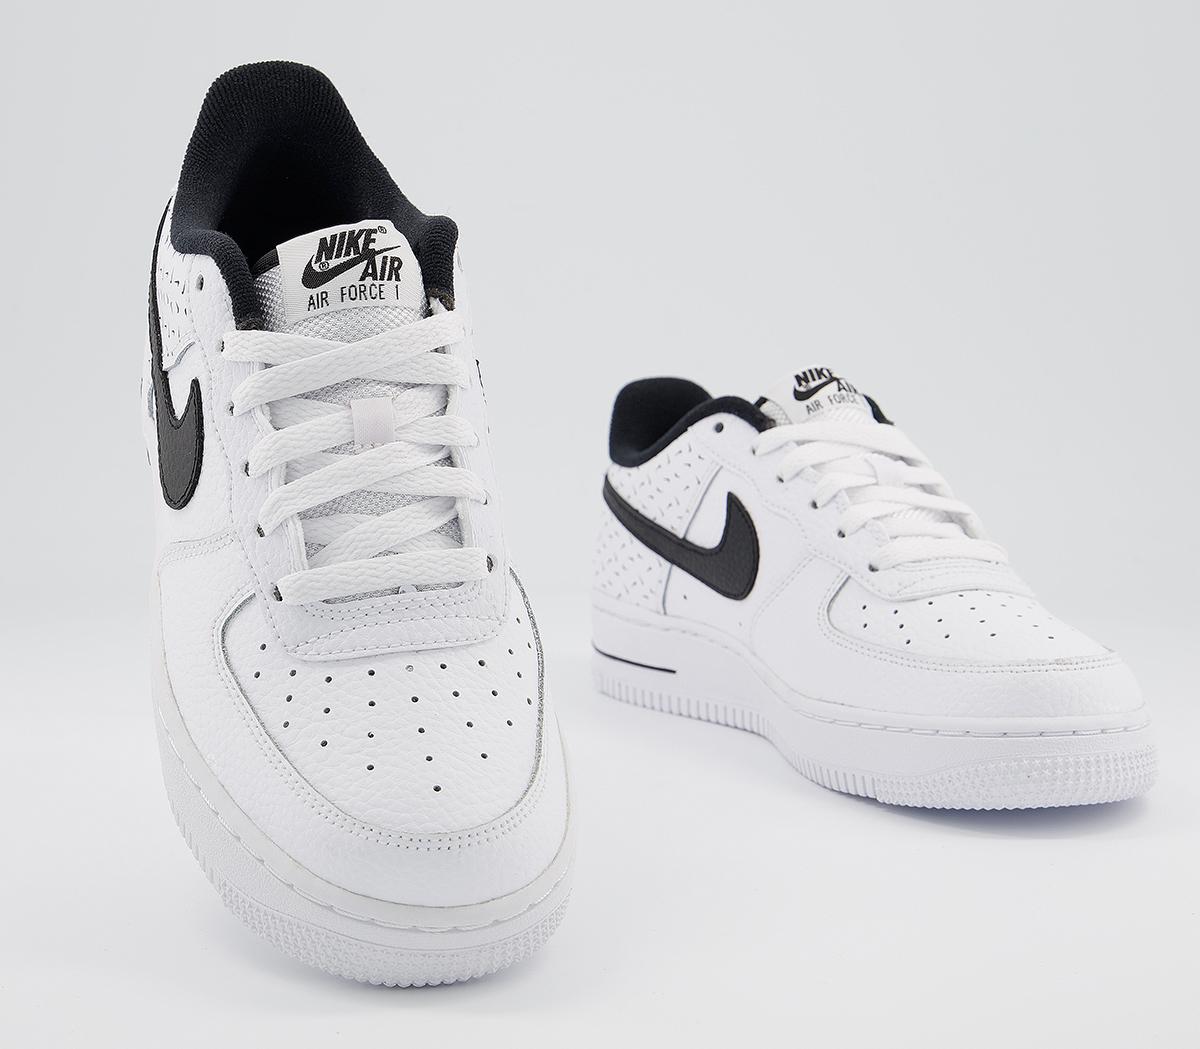 Nike Af1 Boys Trainers White Black Swooshfetti - Hers trainers